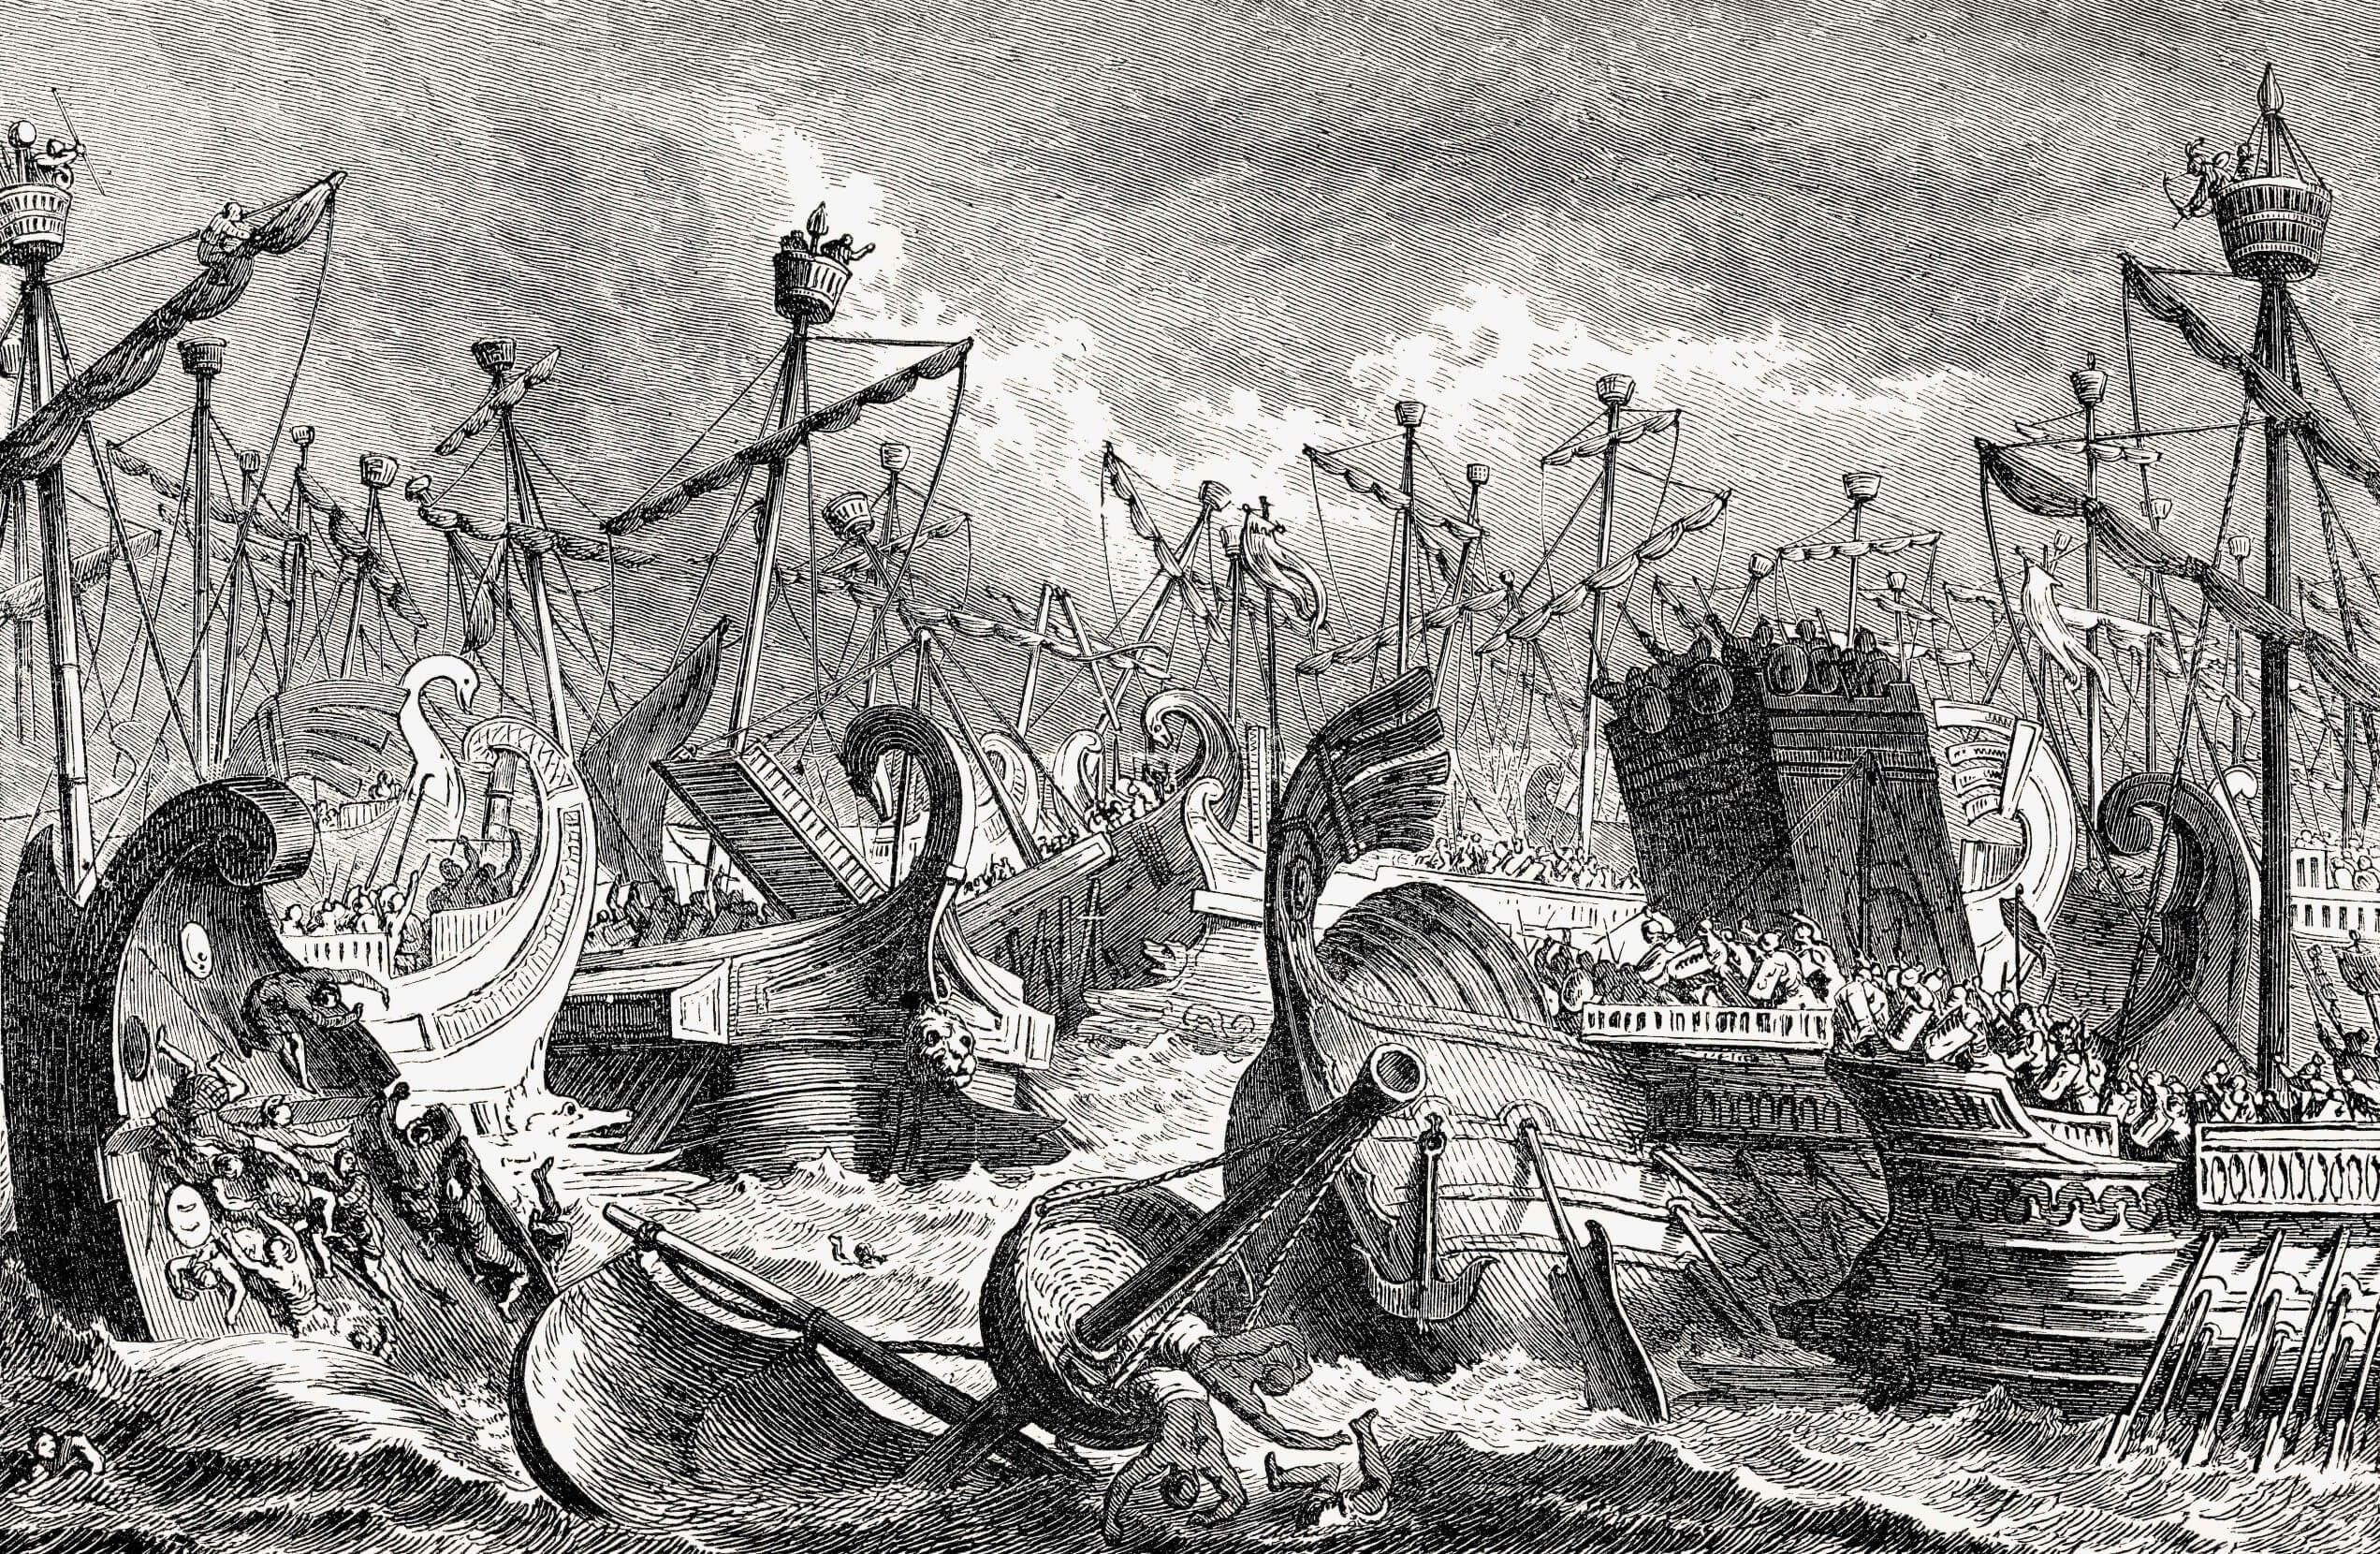 Sailors battle in hand-to-hand combat and are tossed into a turbulent sea during the Battle of the Aegates, Sicily on 10 March 241 BC, First Punic War.